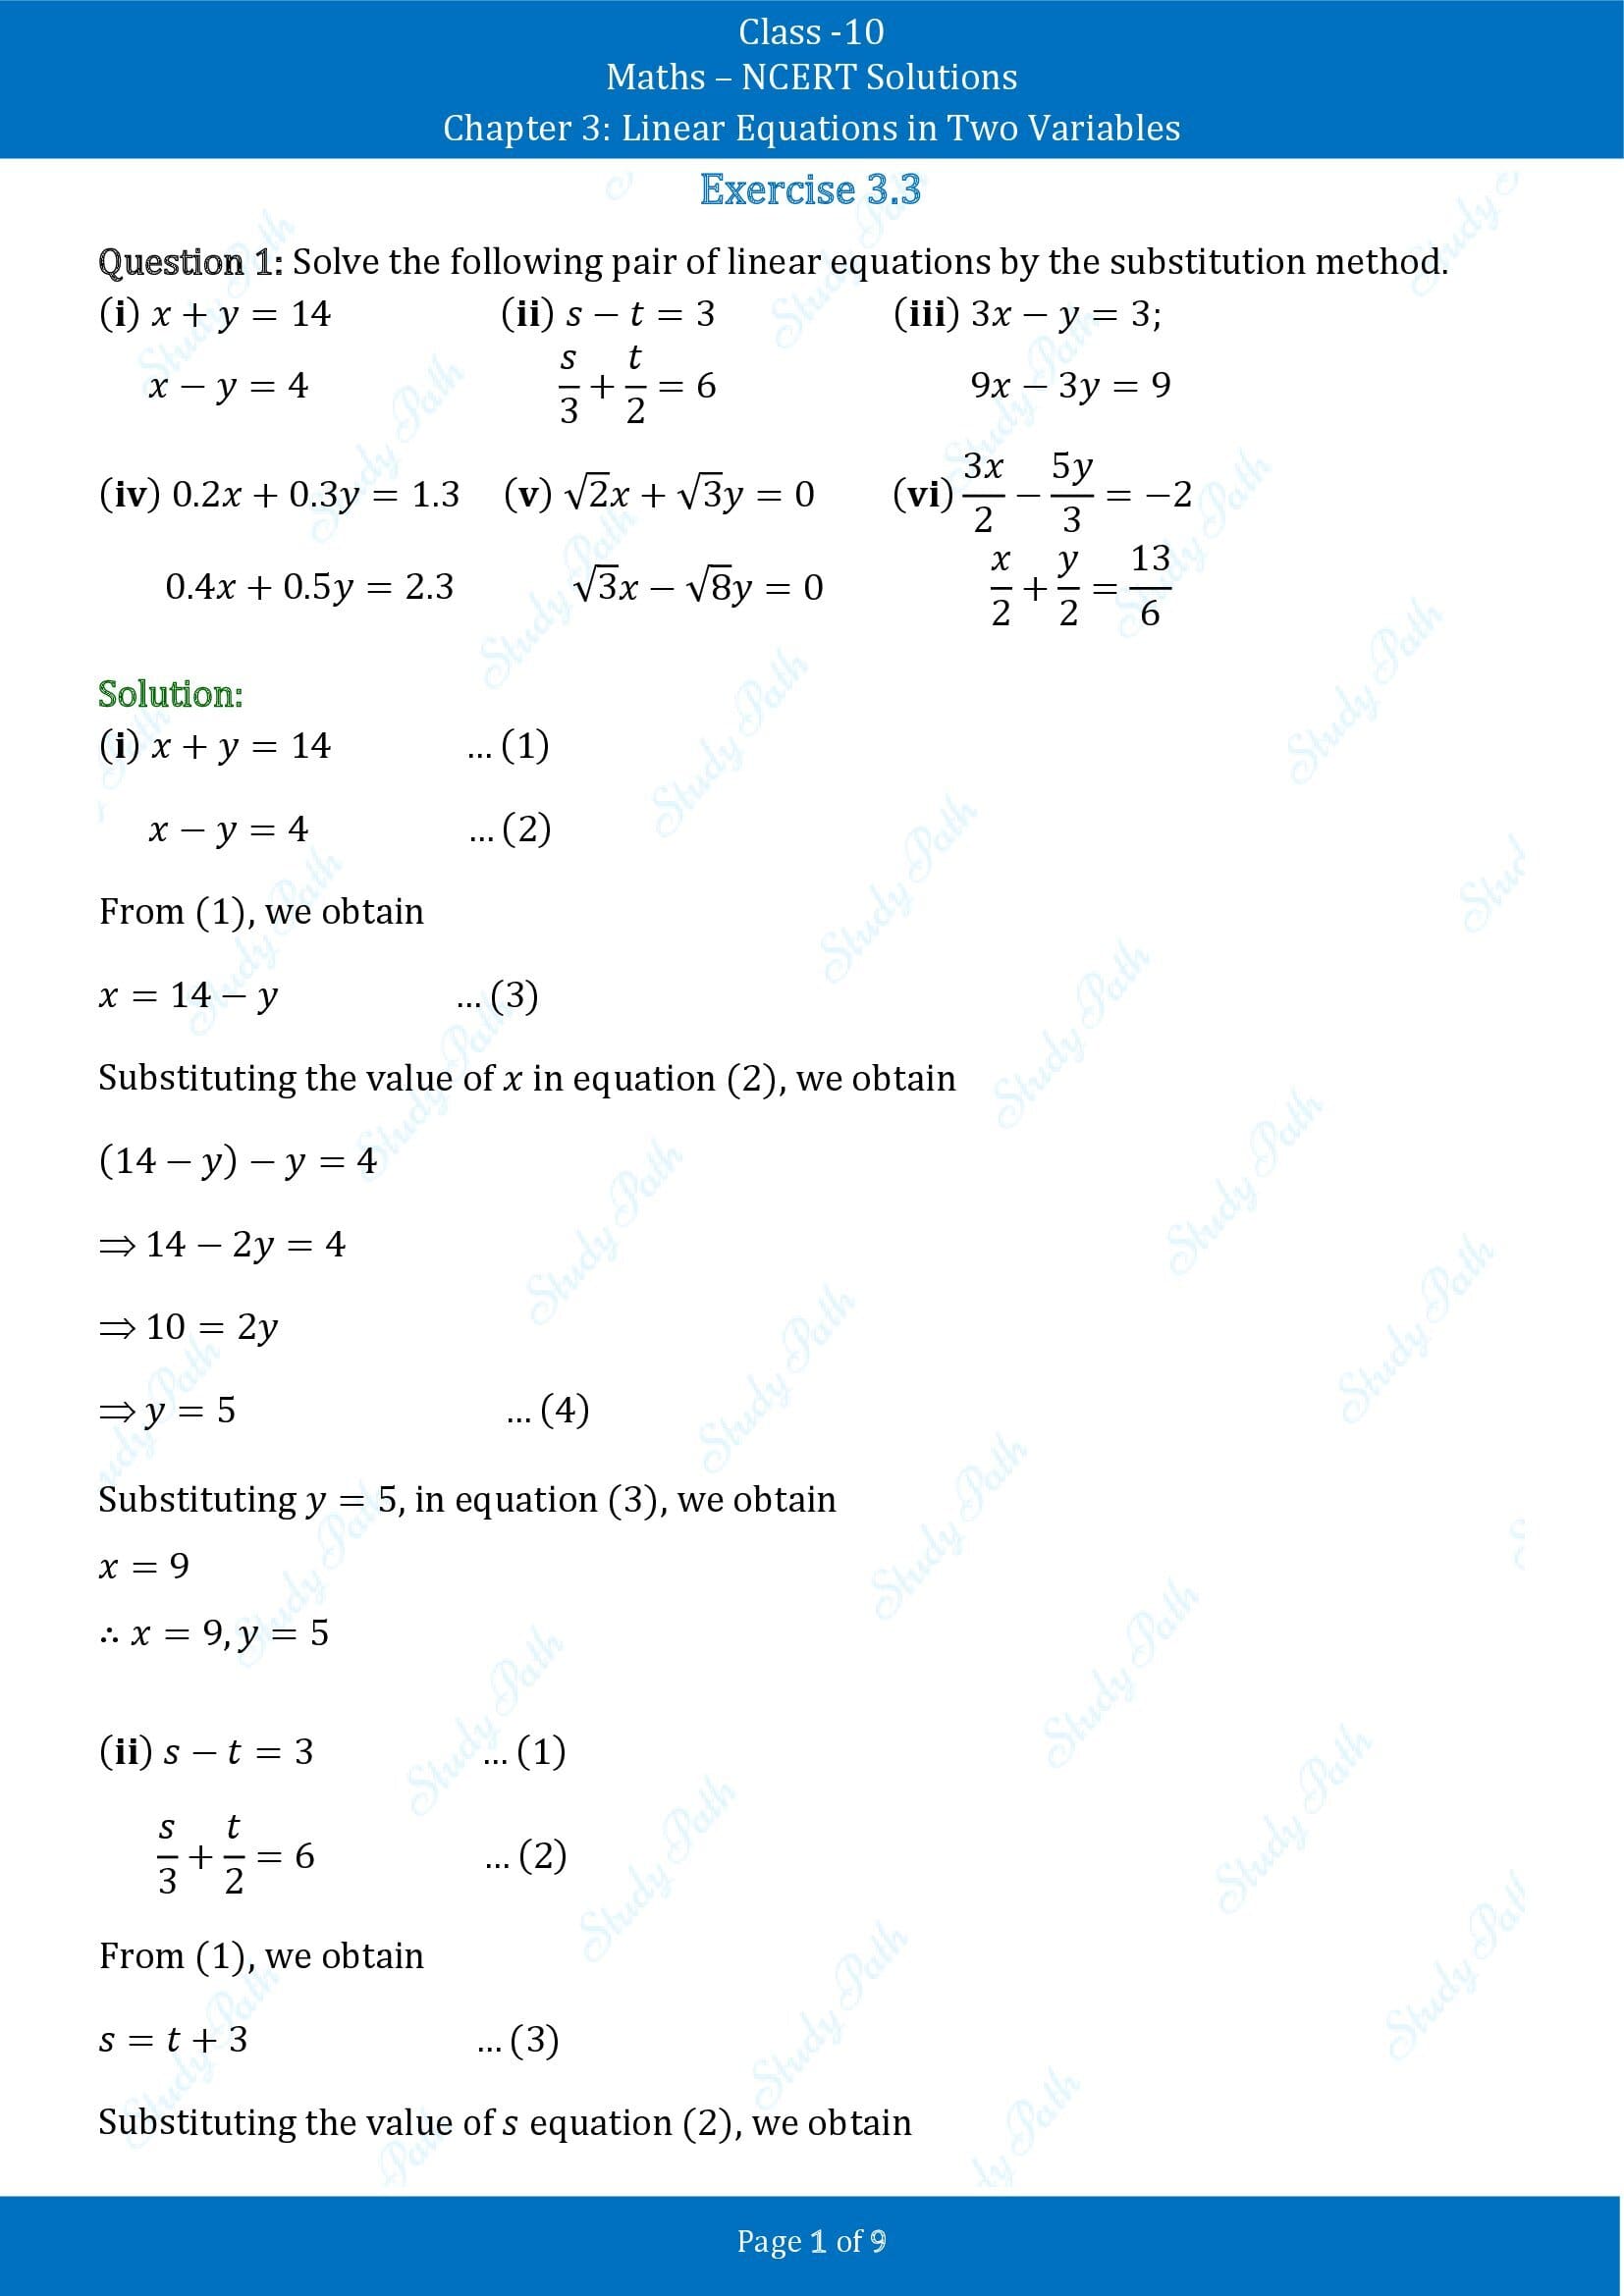 NCERT Solutions for Class 10 Maths Chapter 3 Linear Equations in Two Variables Exercise 3.3 00001